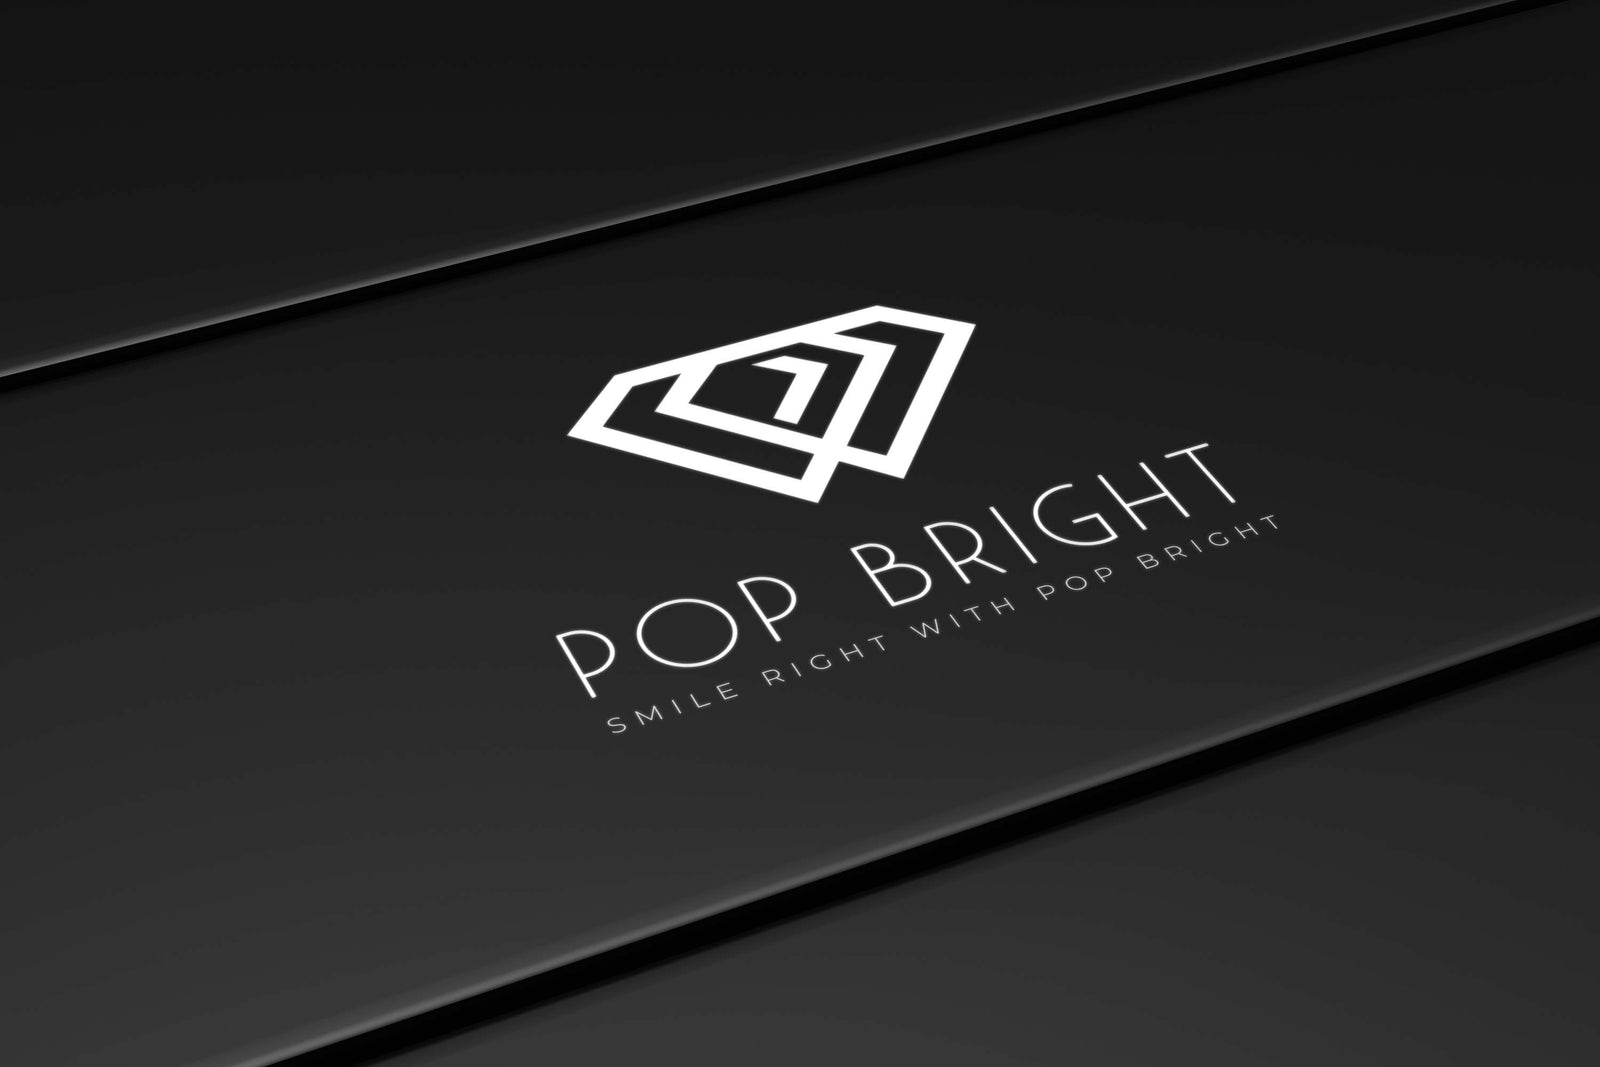 Pop Bright Luxury Toothpaste Tablets